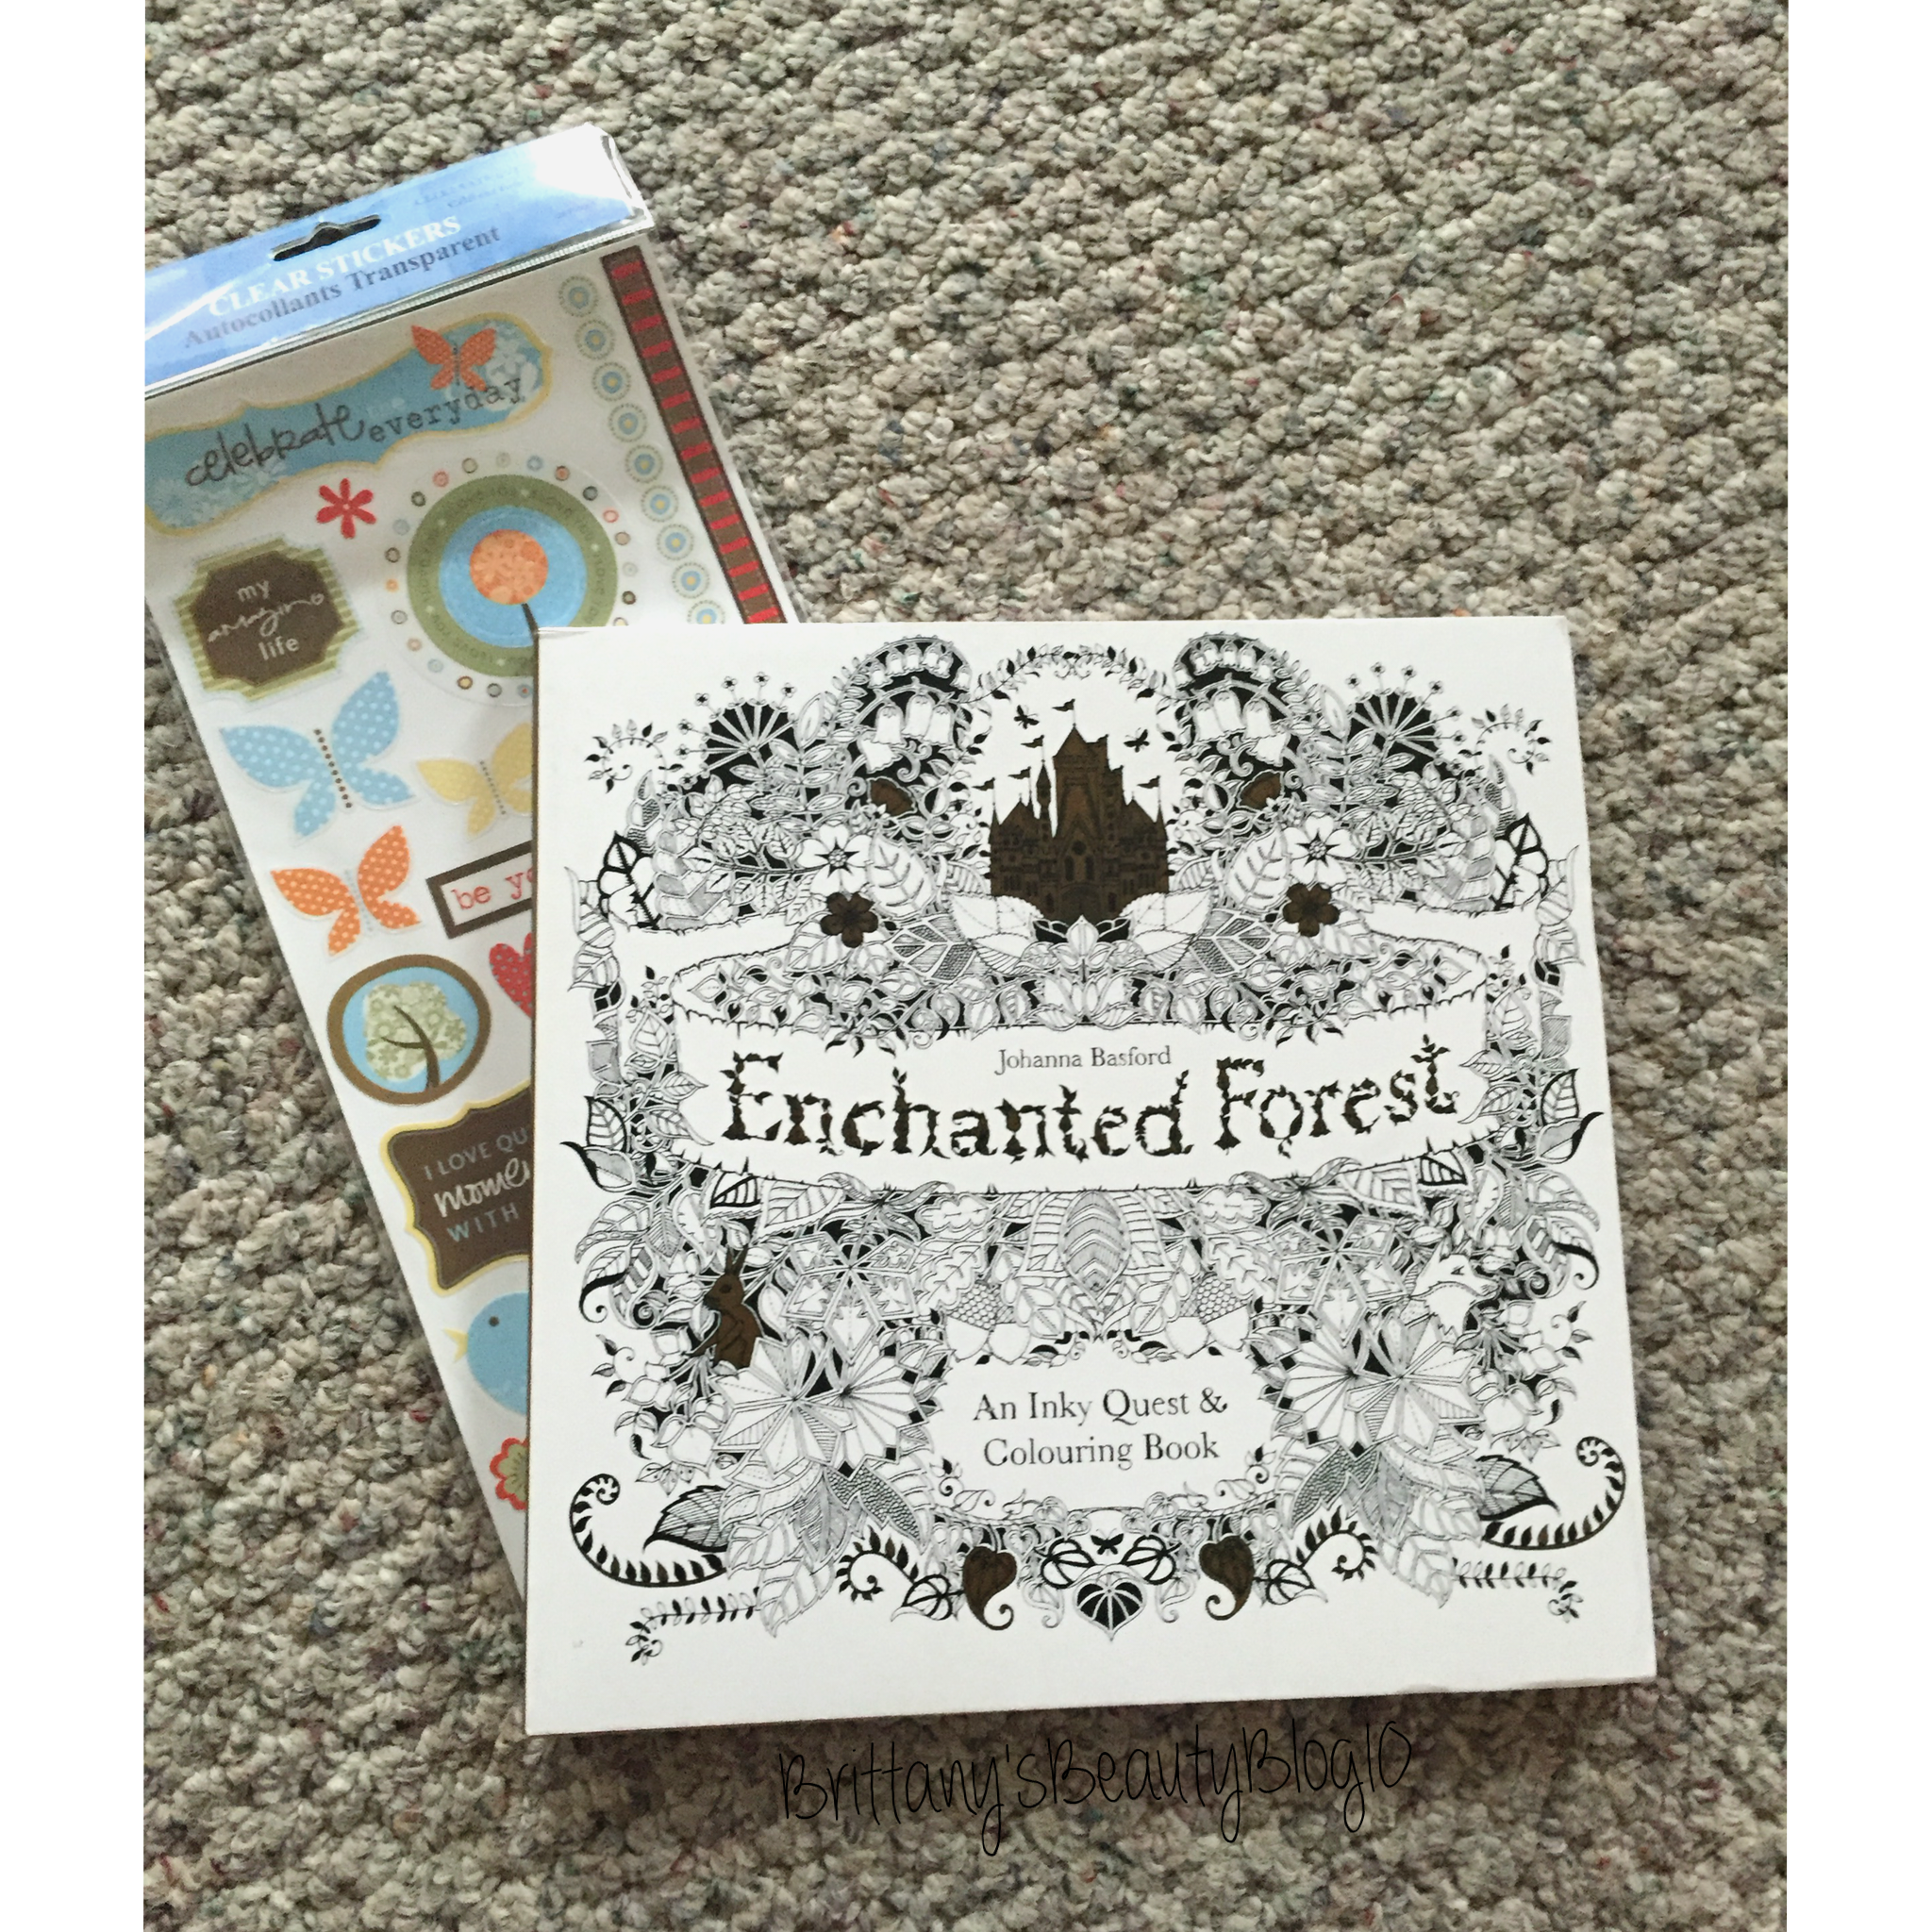 The enchanted forest by johanna basford adult coloring book review